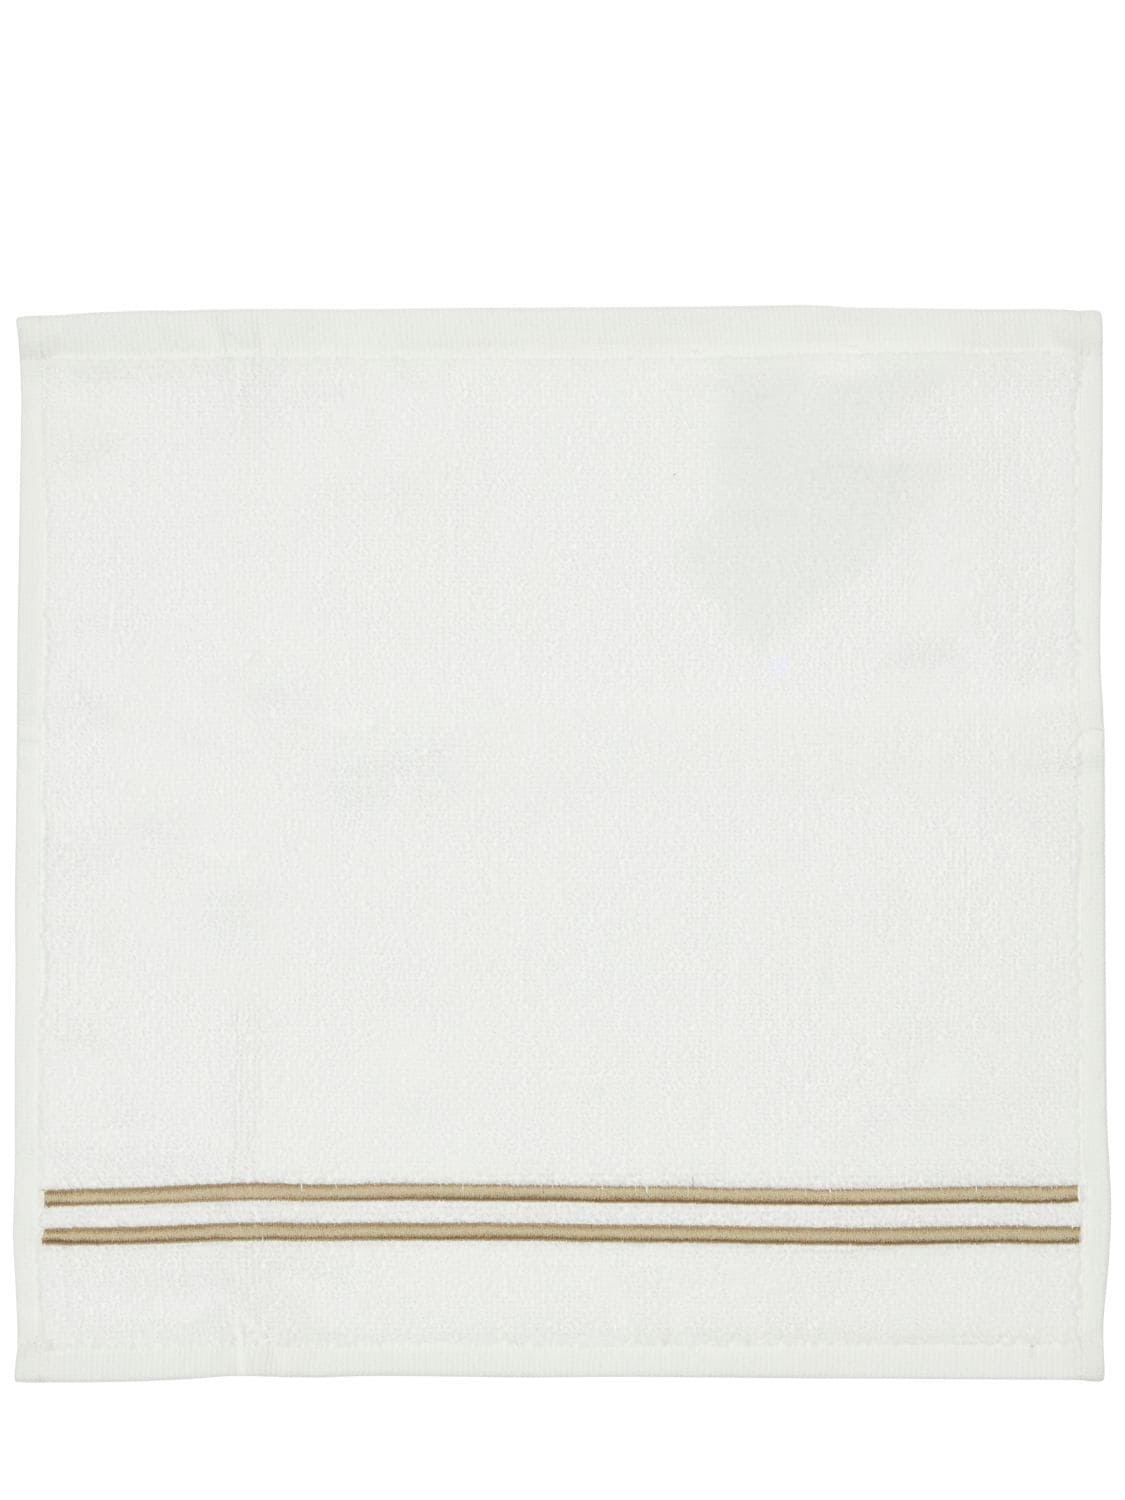 Image of Hotel Classic Wash Cloth